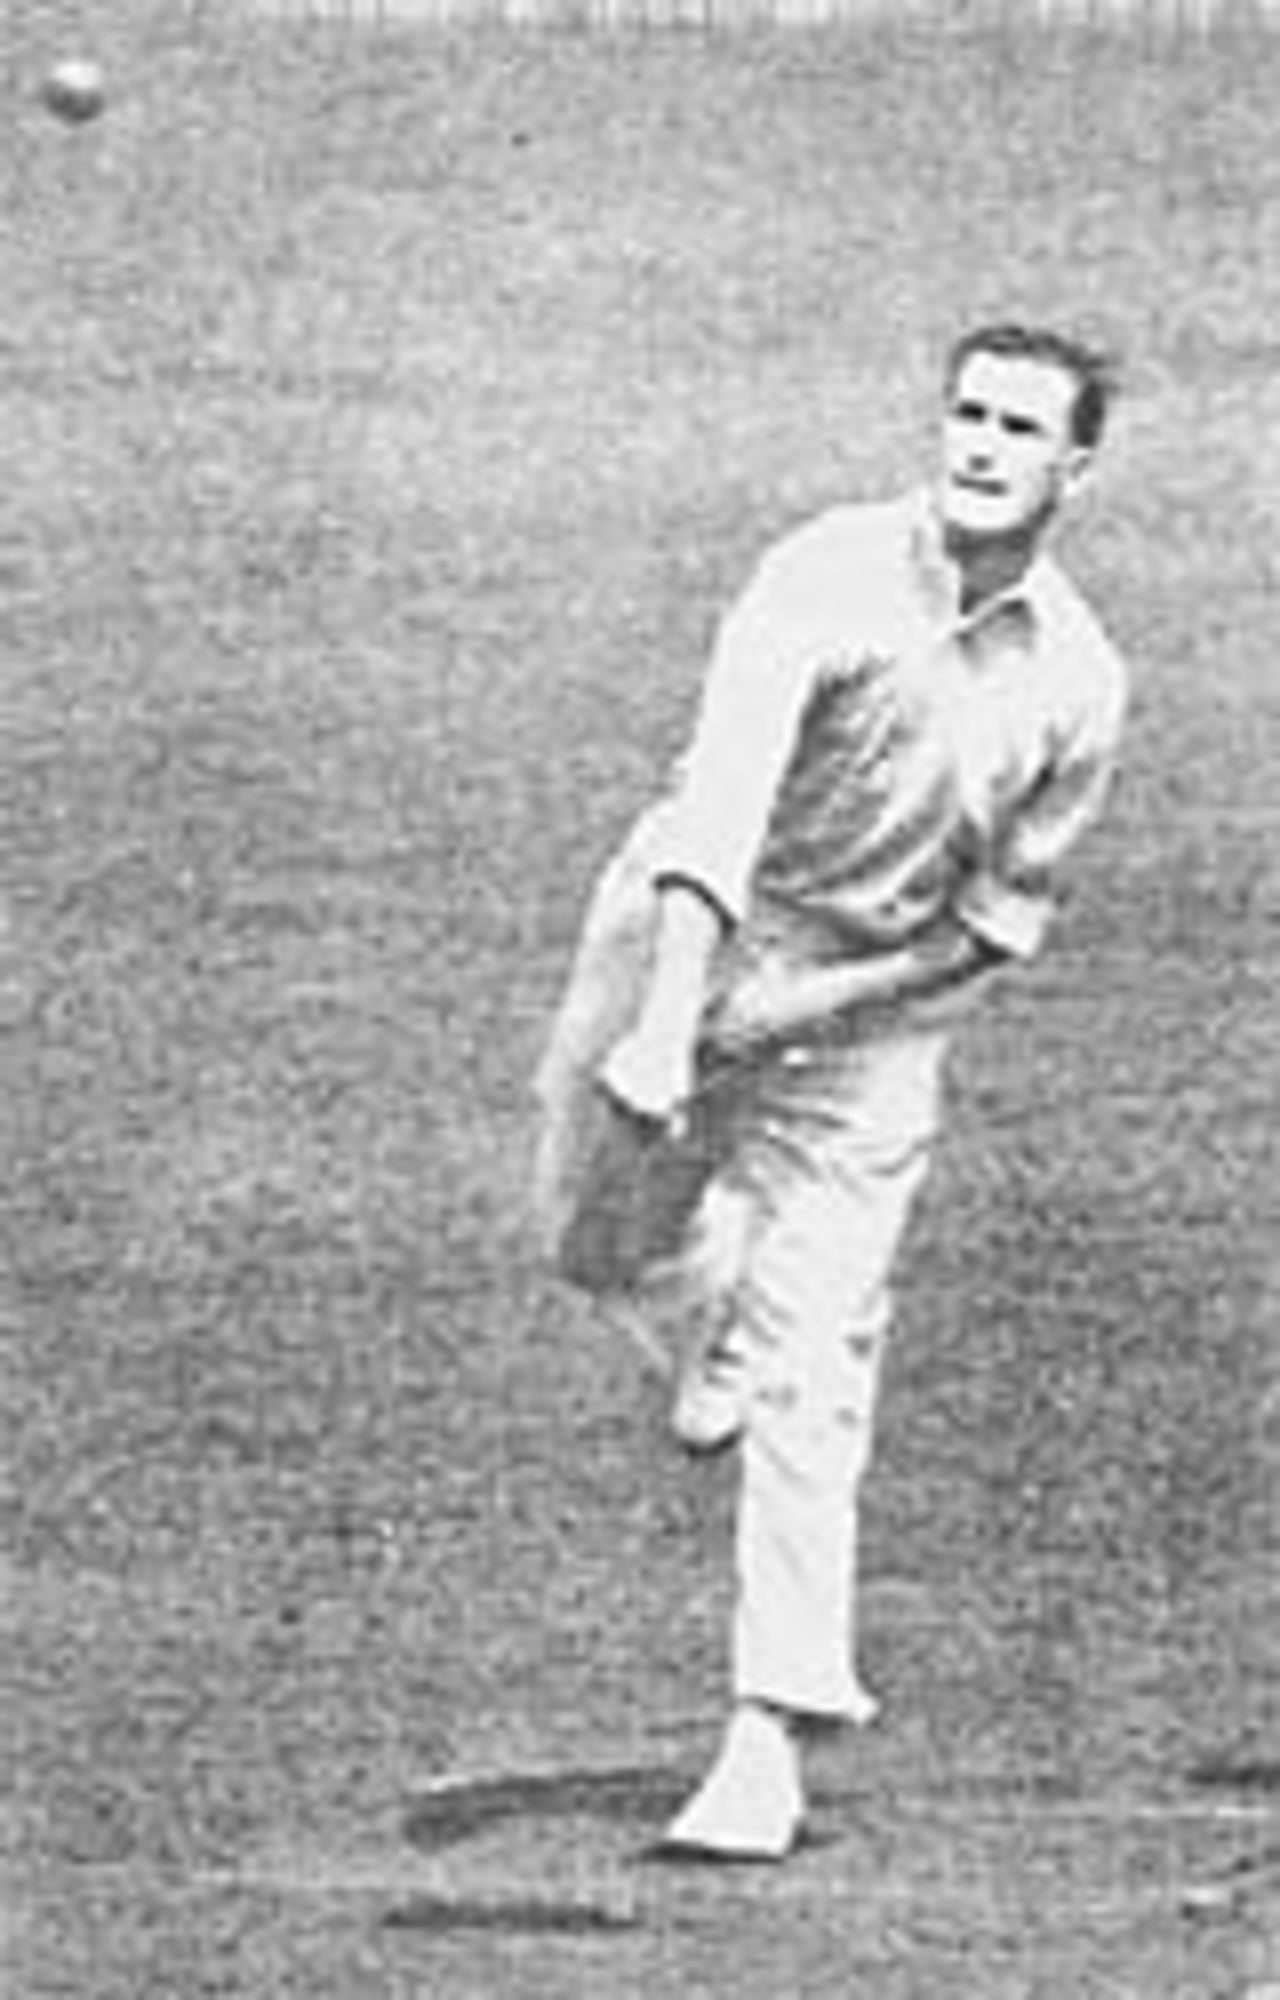 Jim Laker bowling on his way to 8 for 2, England v The Rest, Bradford, May 31, 1950